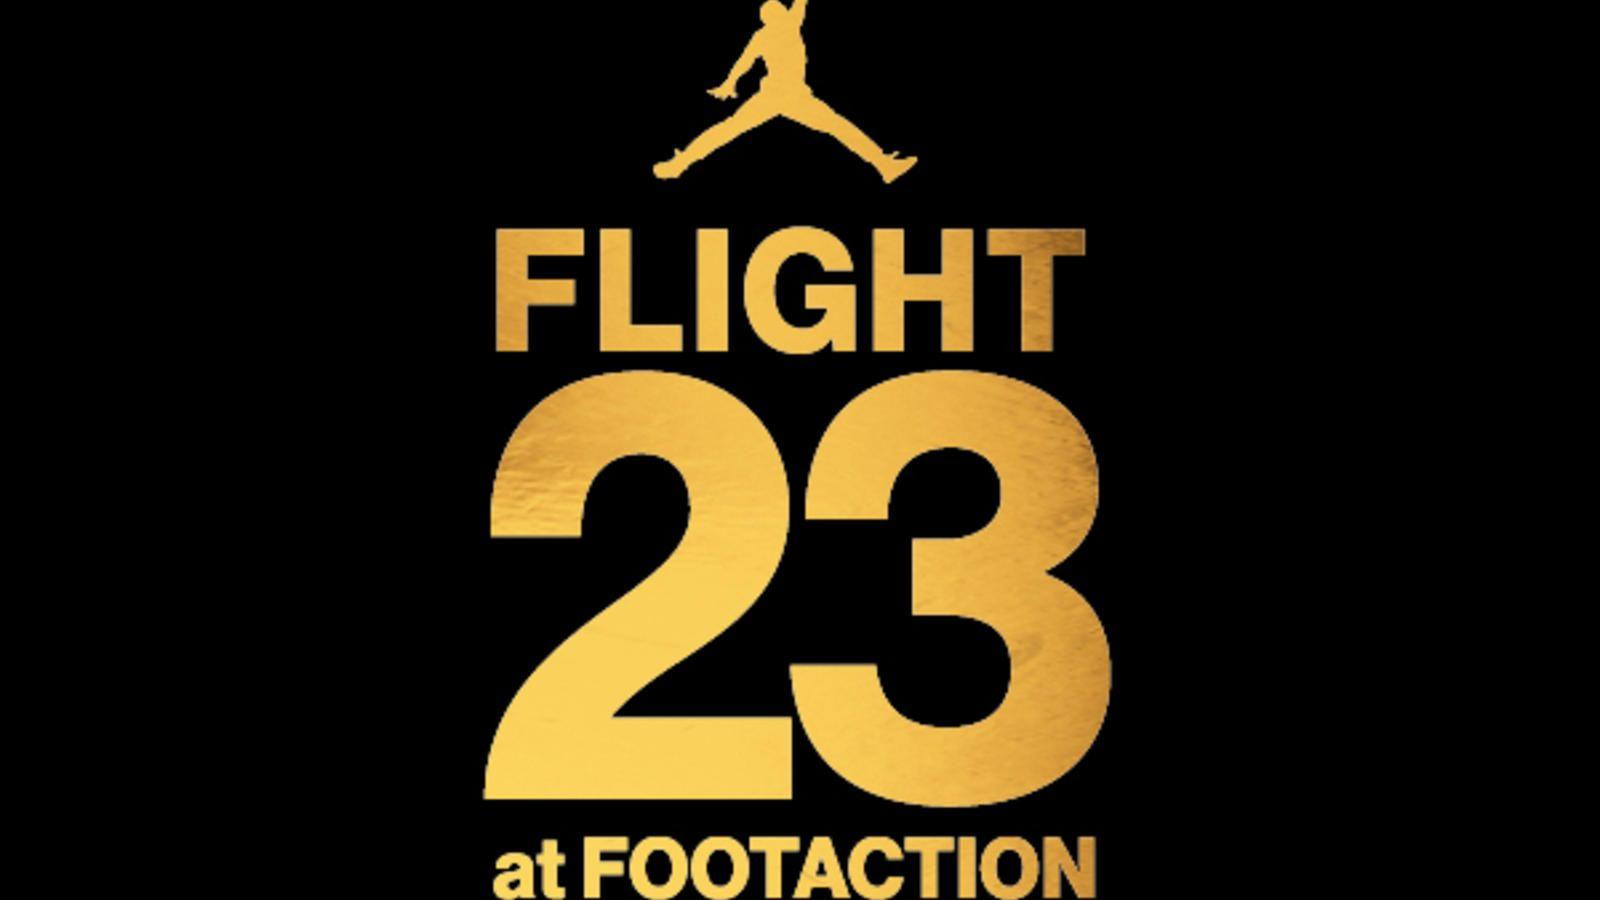 Flight 23 At Footaction To Be First North America Jordan Only Retail